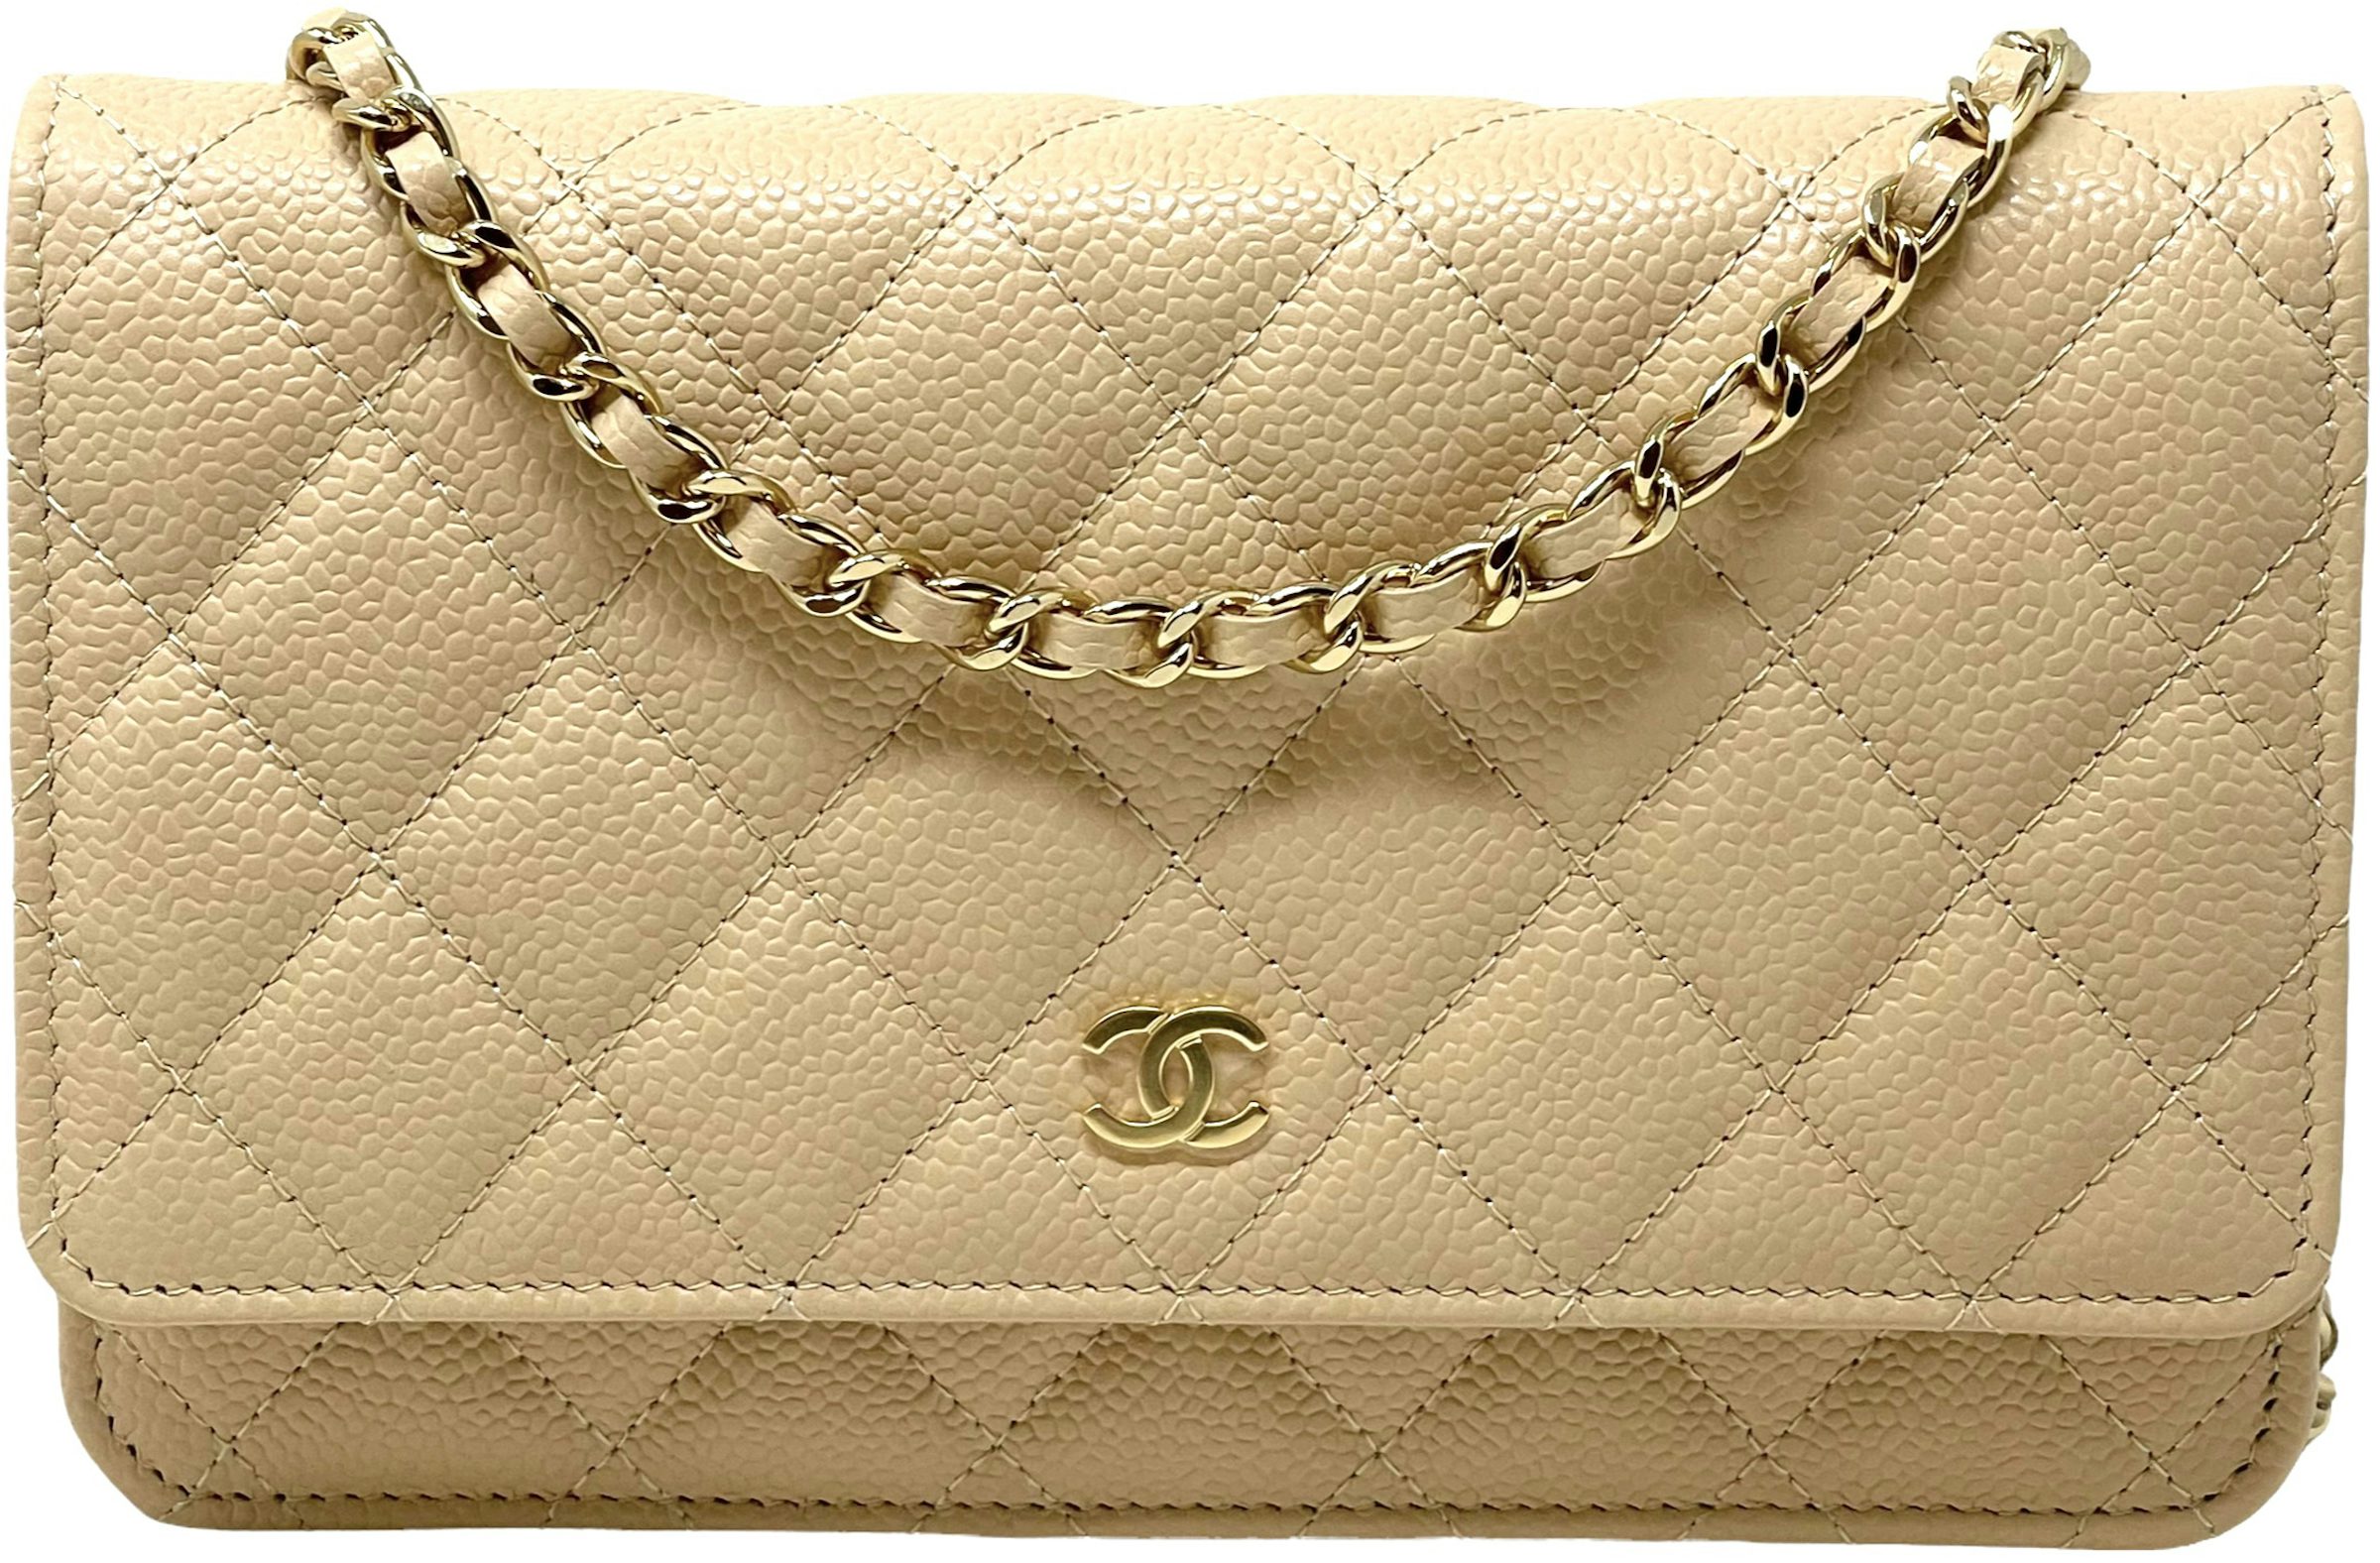 Chanel Classic Quilted Caviar Leather WOC Wallet Crossbody Bag Beige